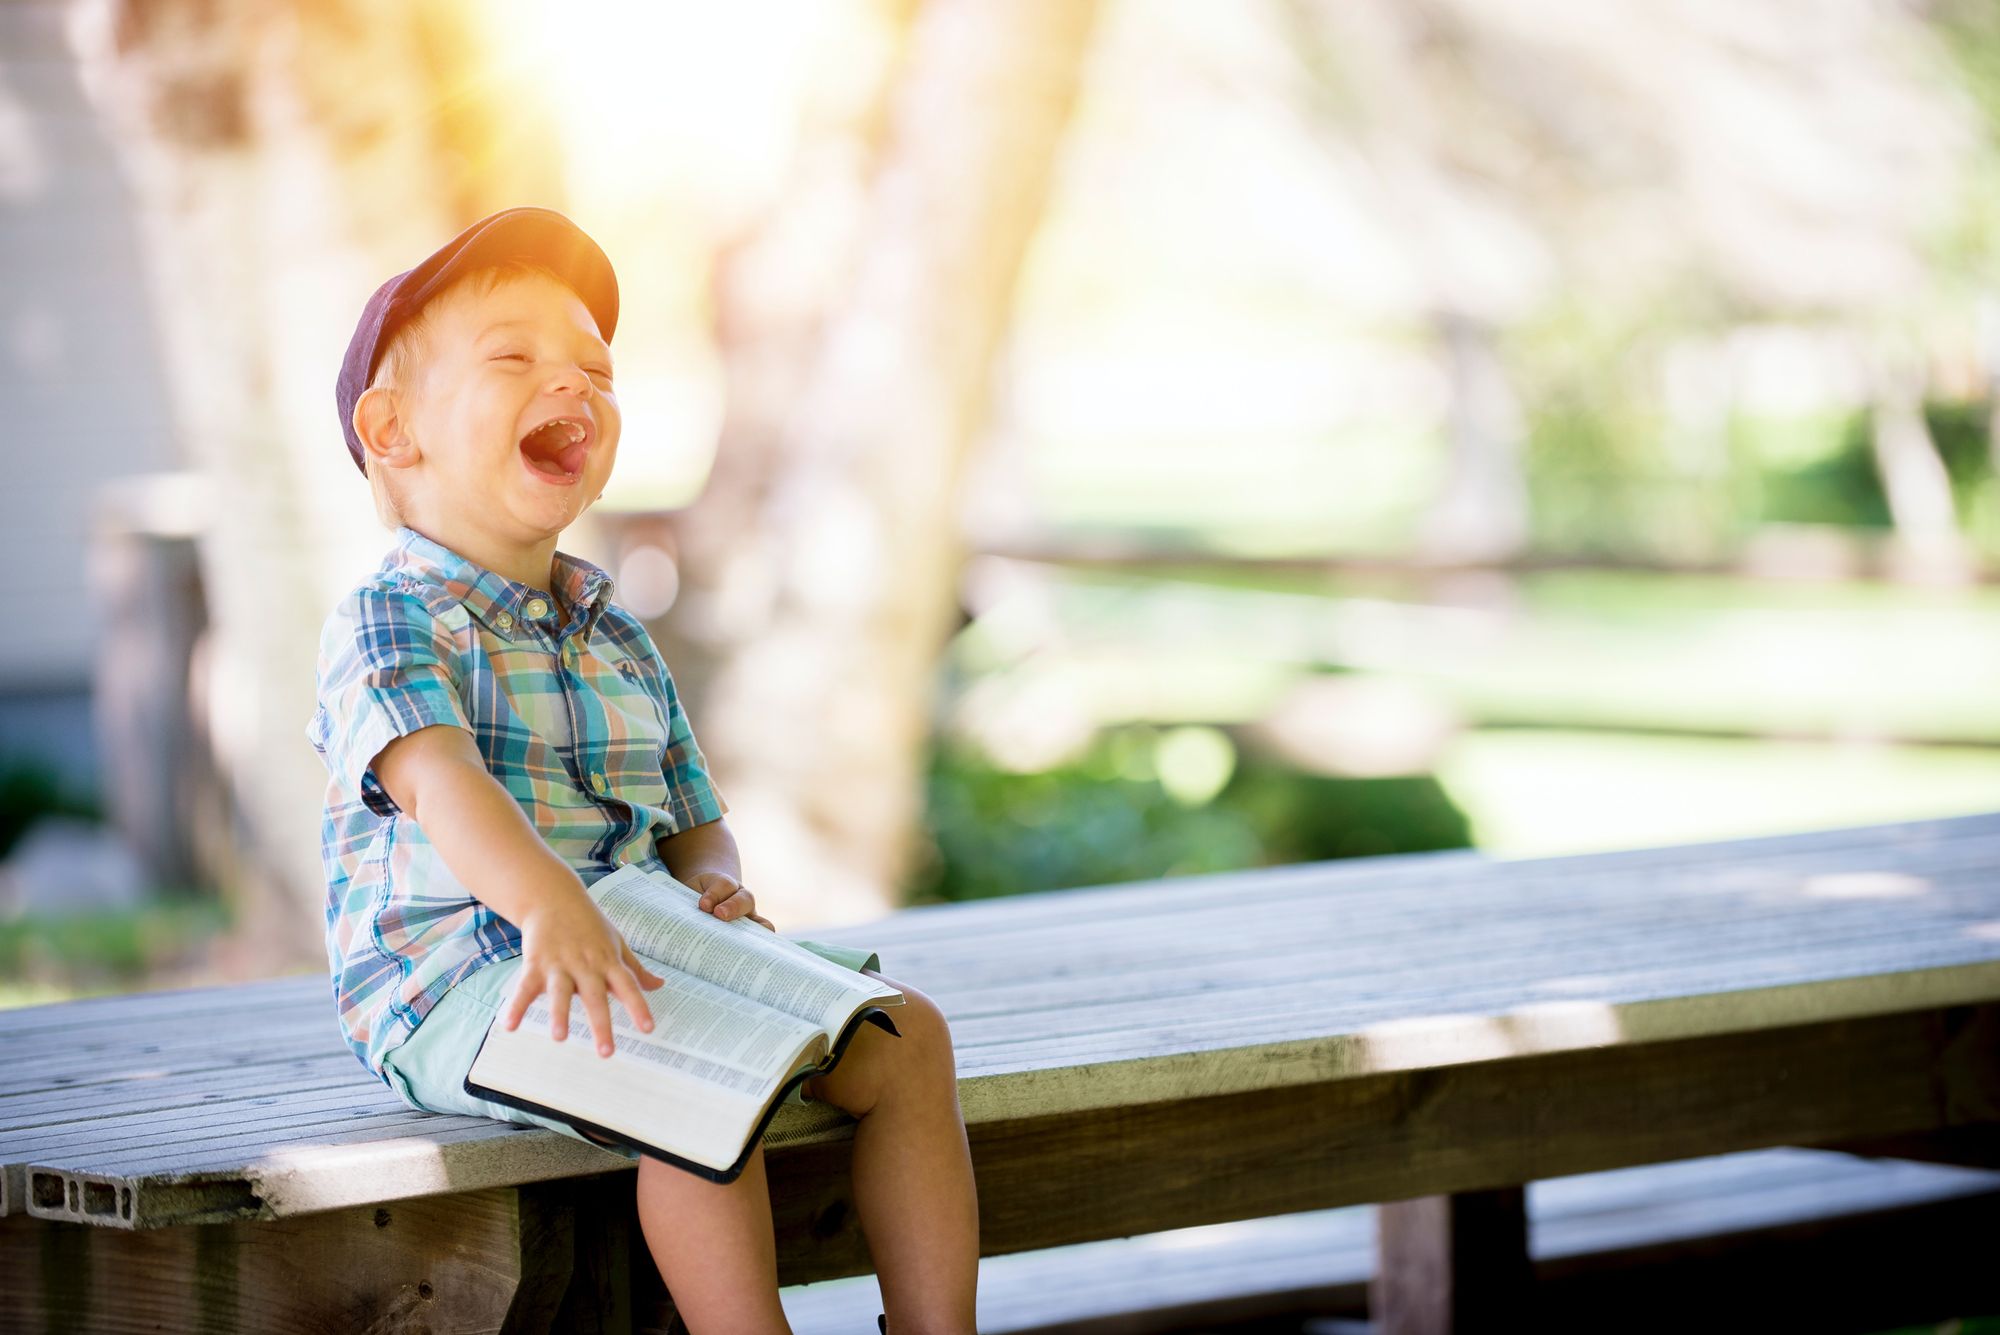 Young boy, with book open, laughing while sitting on picnic table